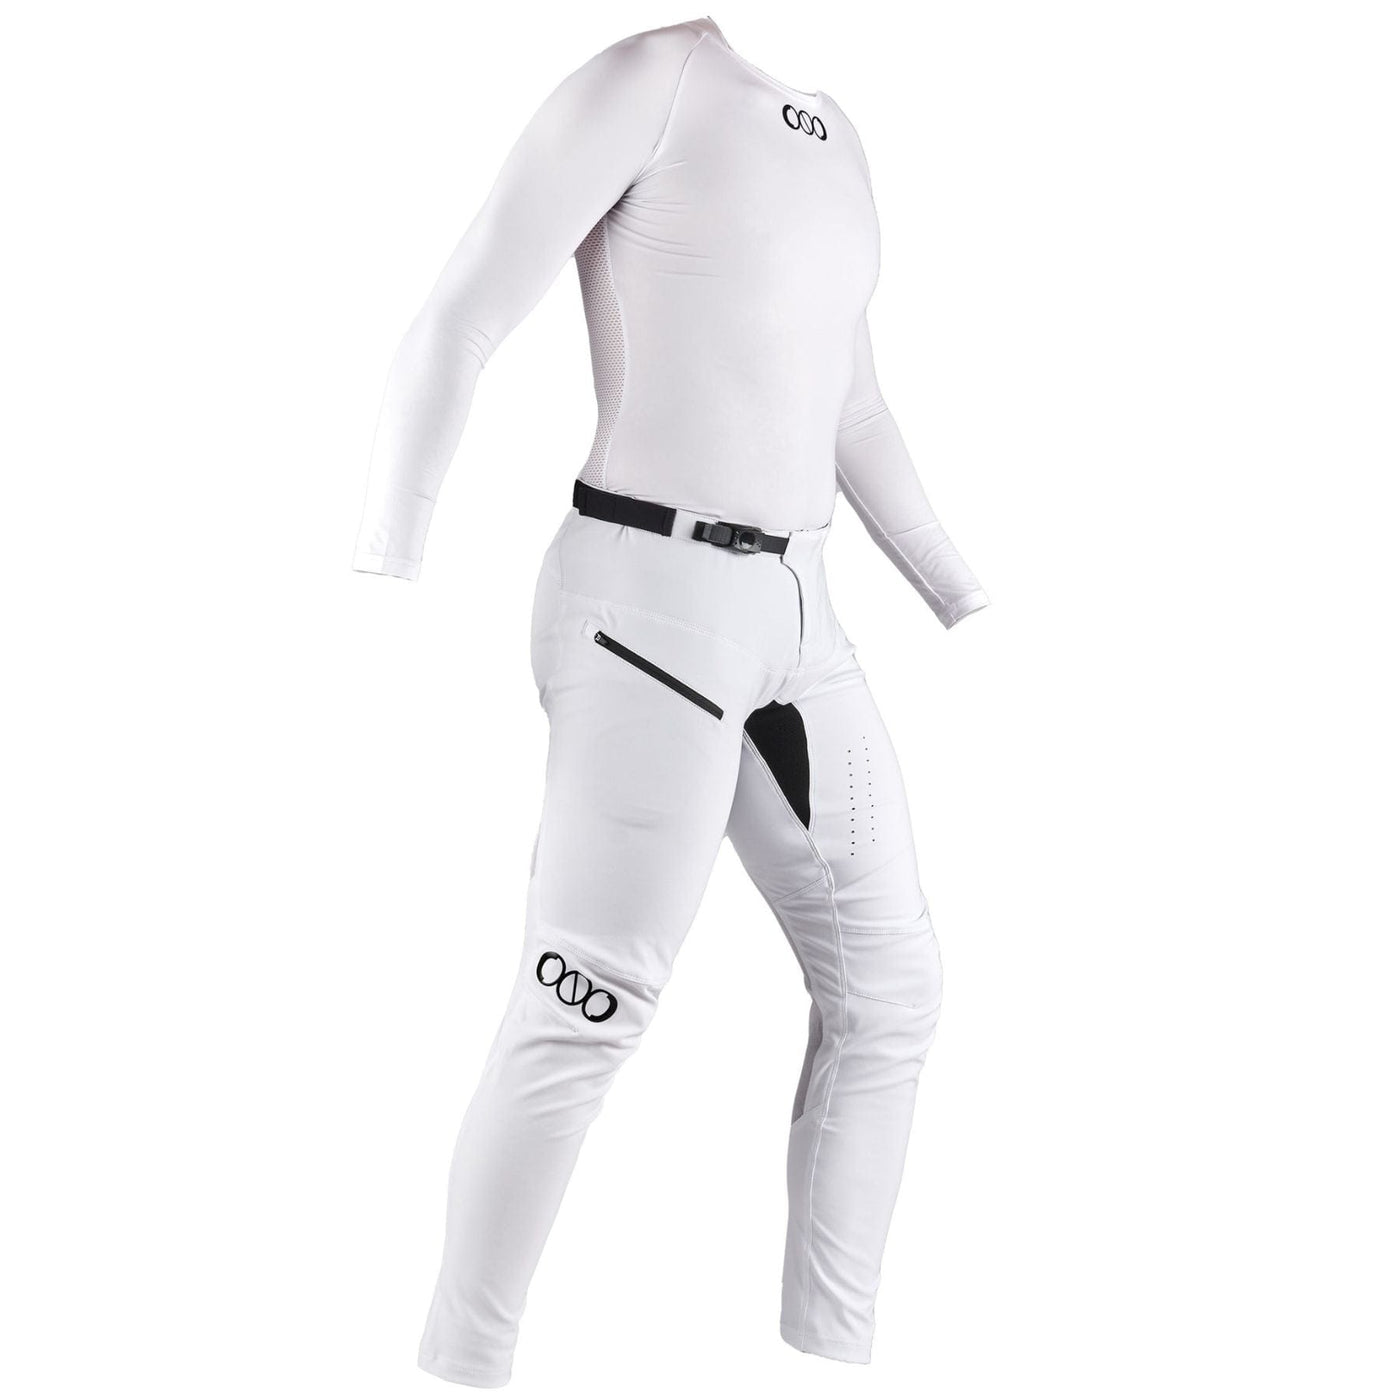 NoLogo Racer Youth Long Sleeve Cycling Jersey Shirt - White